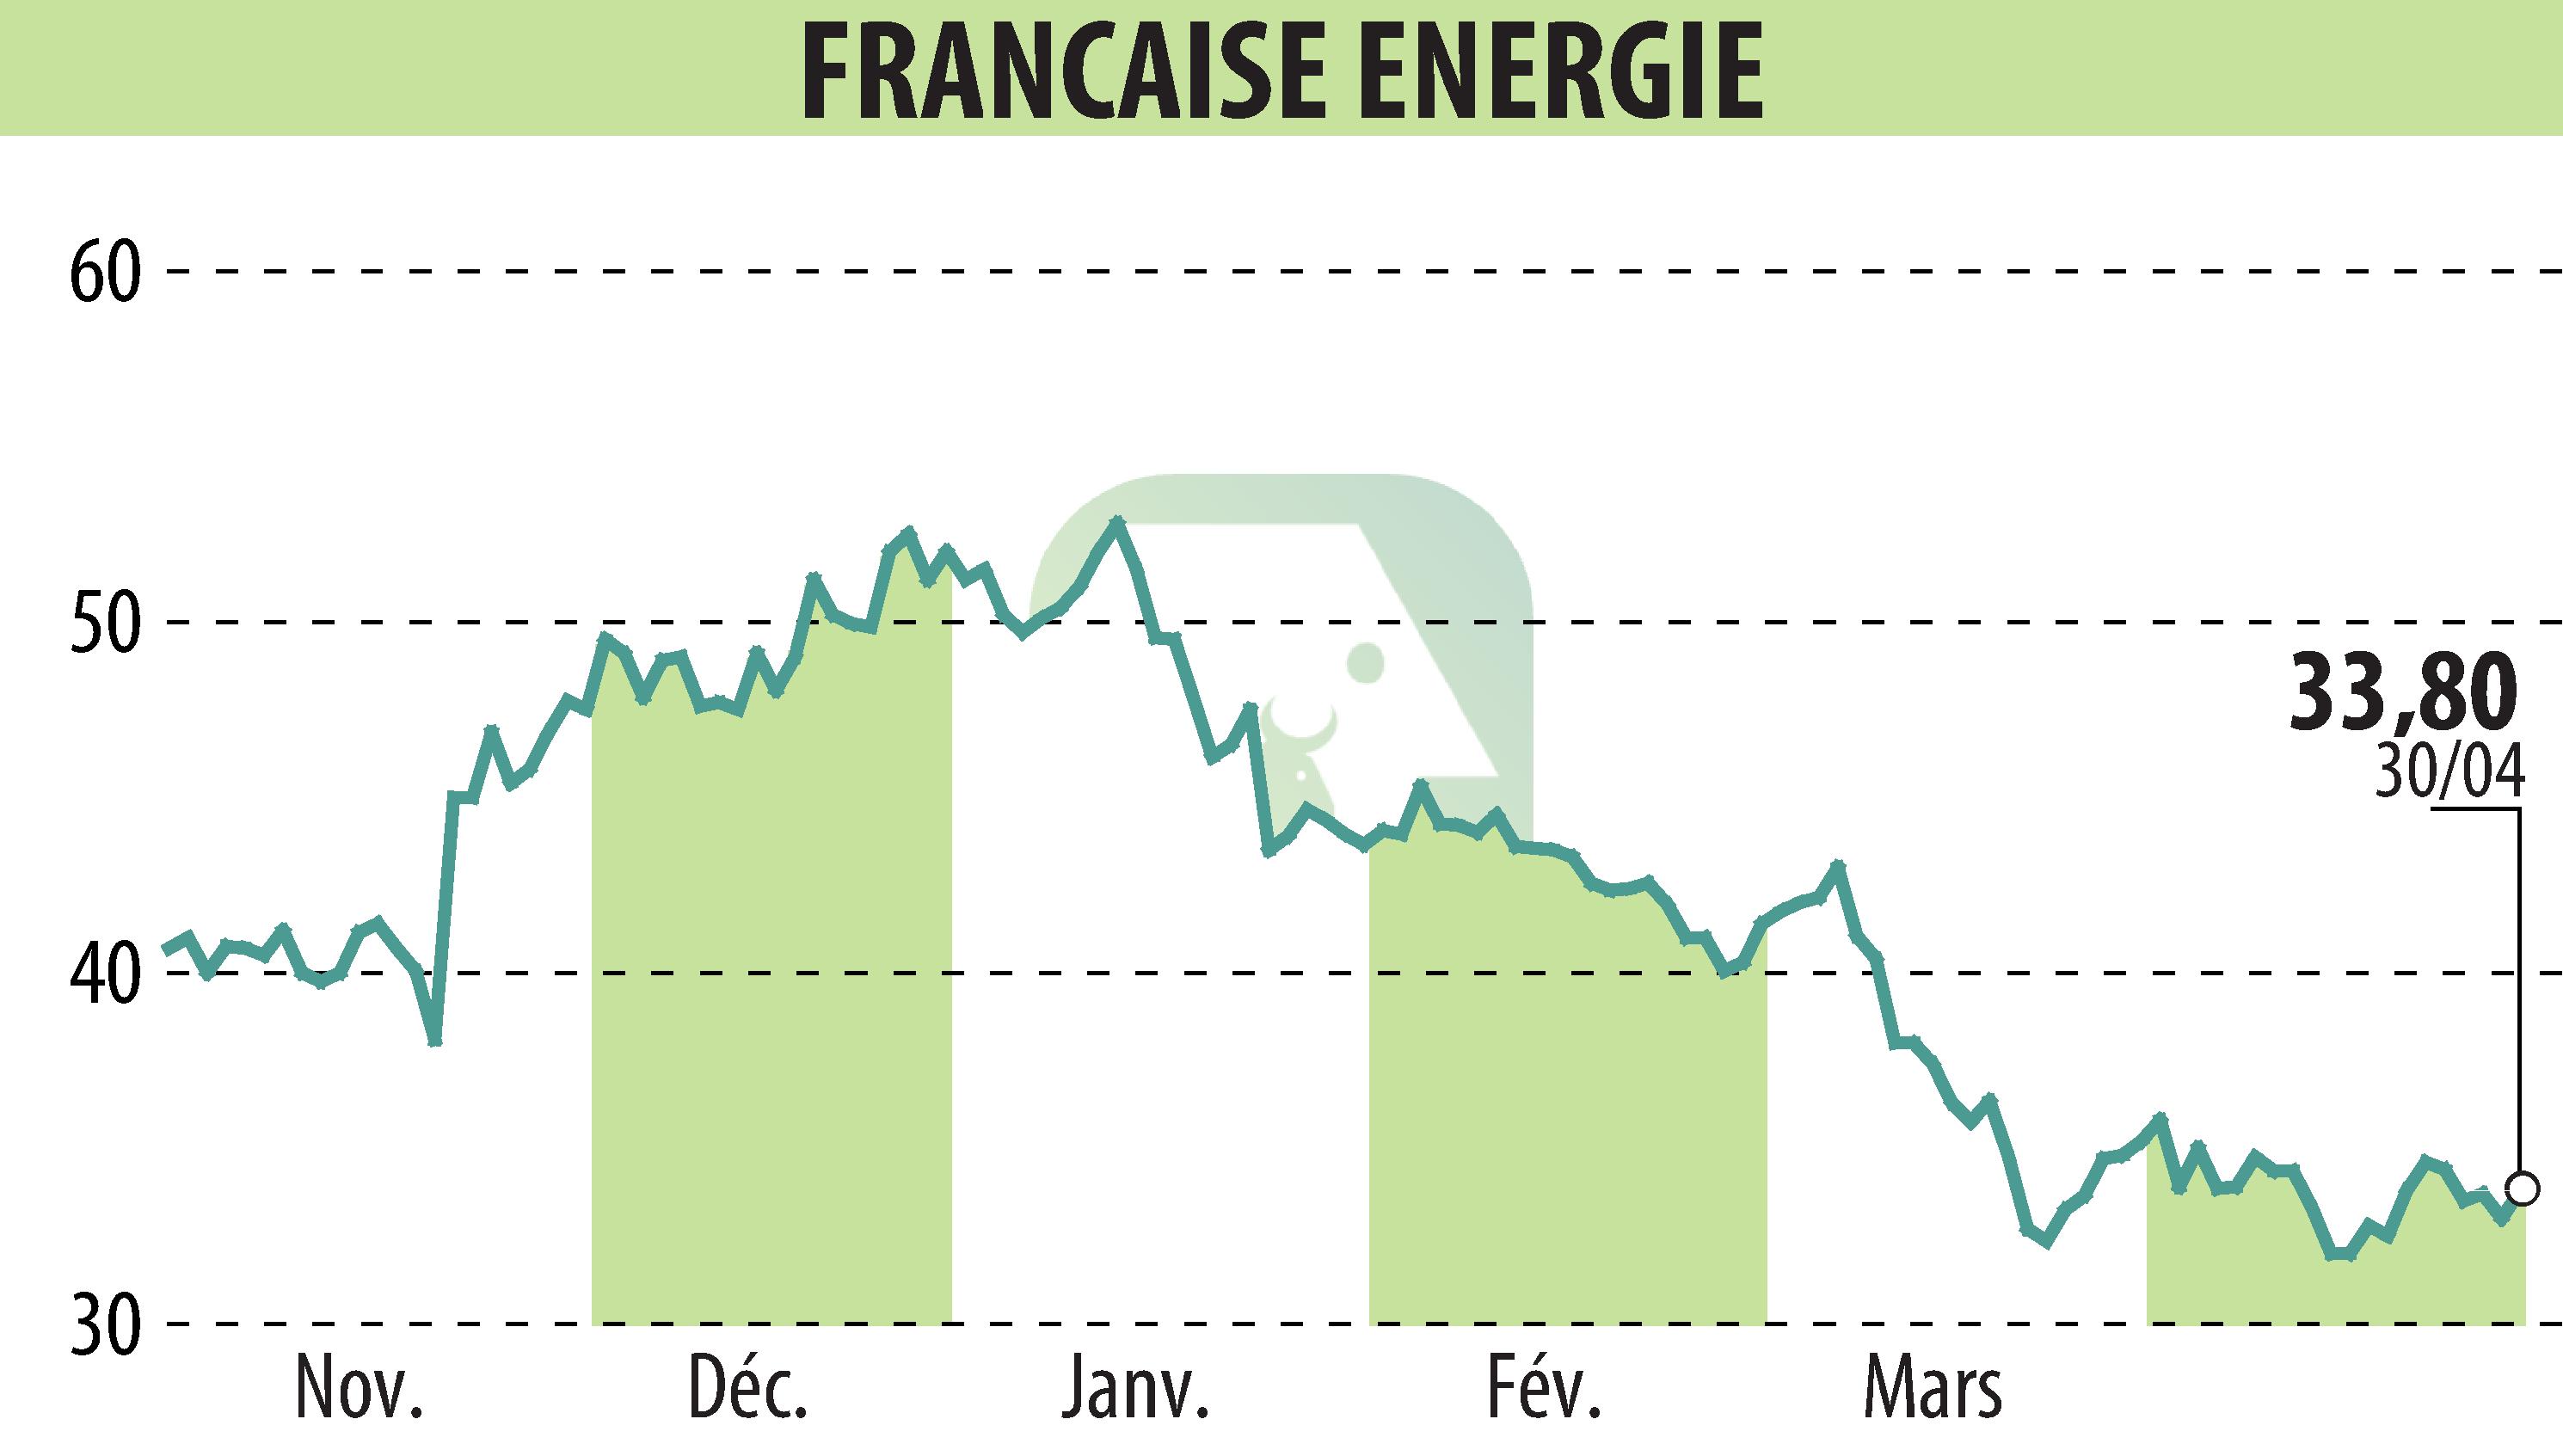 Stock price chart of FRANCAISE ENERGIE (EPA:FDE) showing fluctuations.